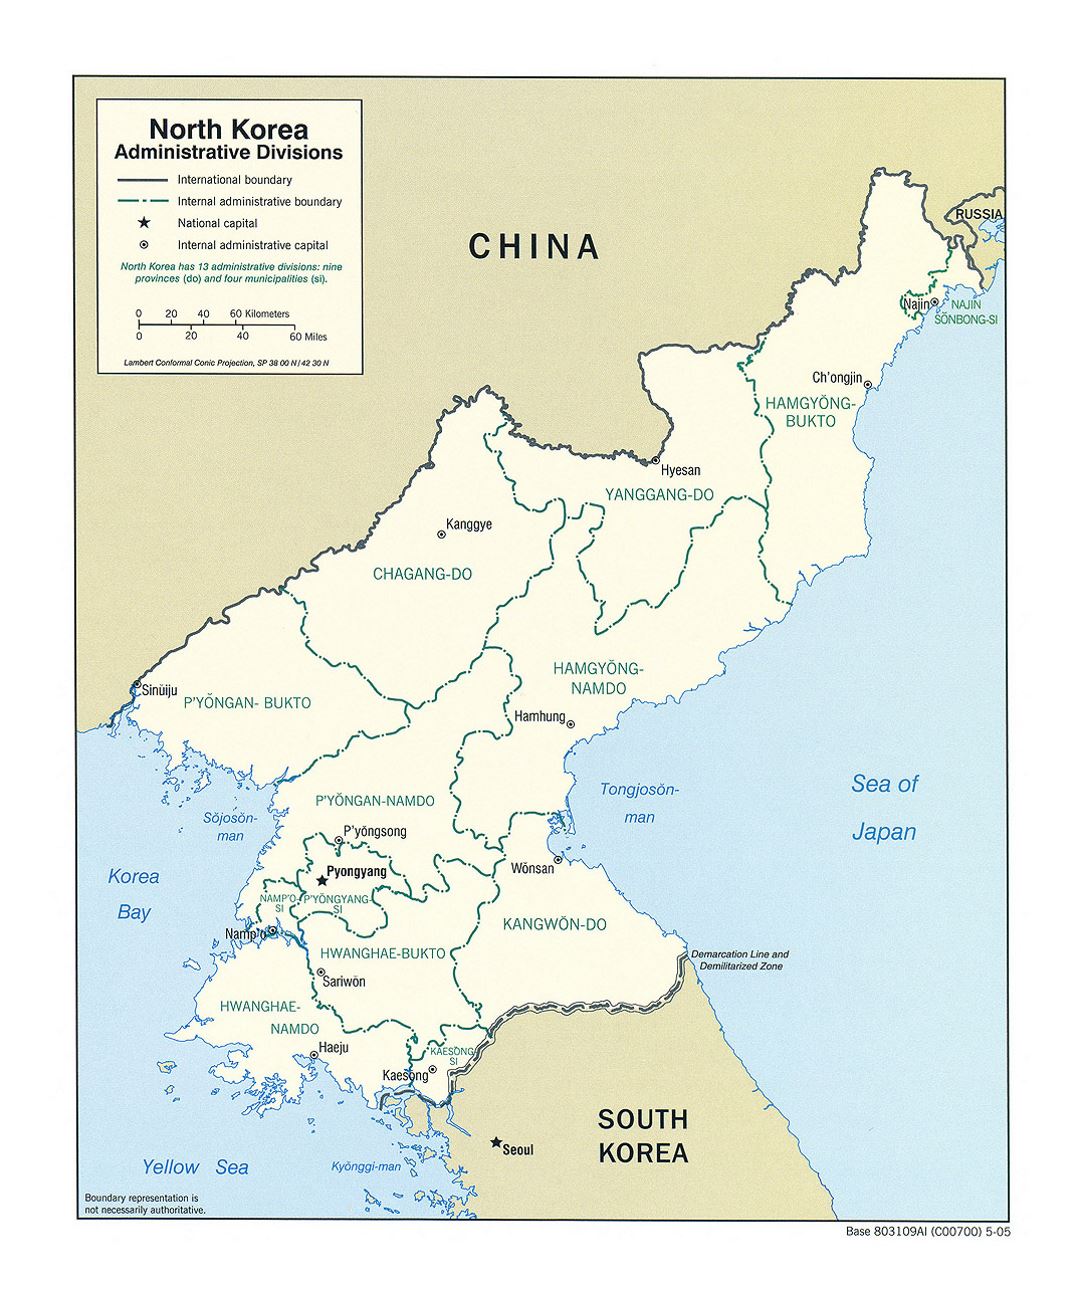 Detailed administrative divisions map of North Korea - 2005